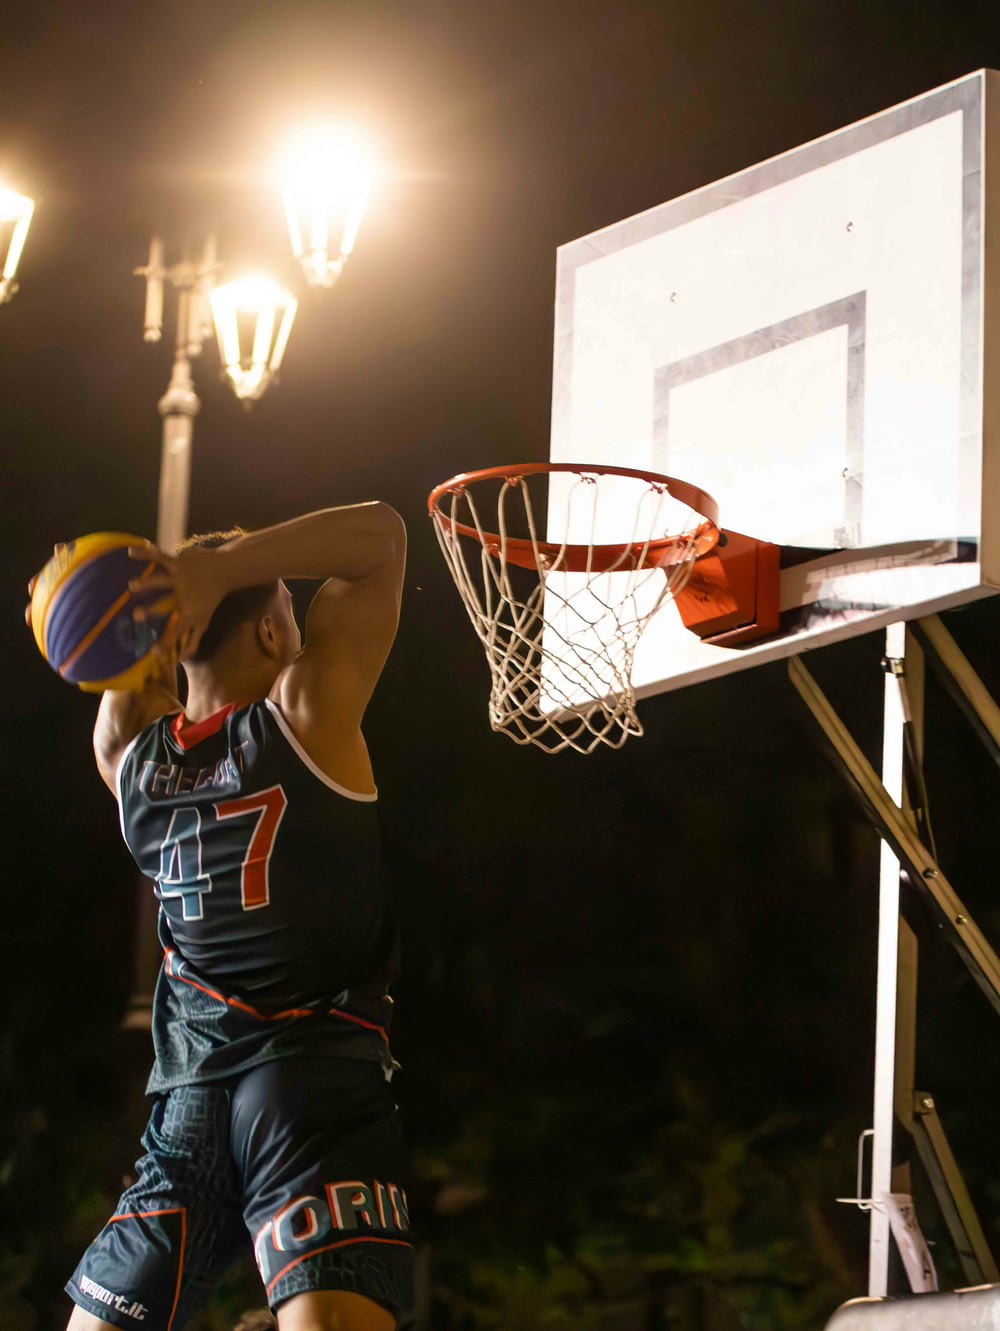 a basketball player is about to dunk the ball